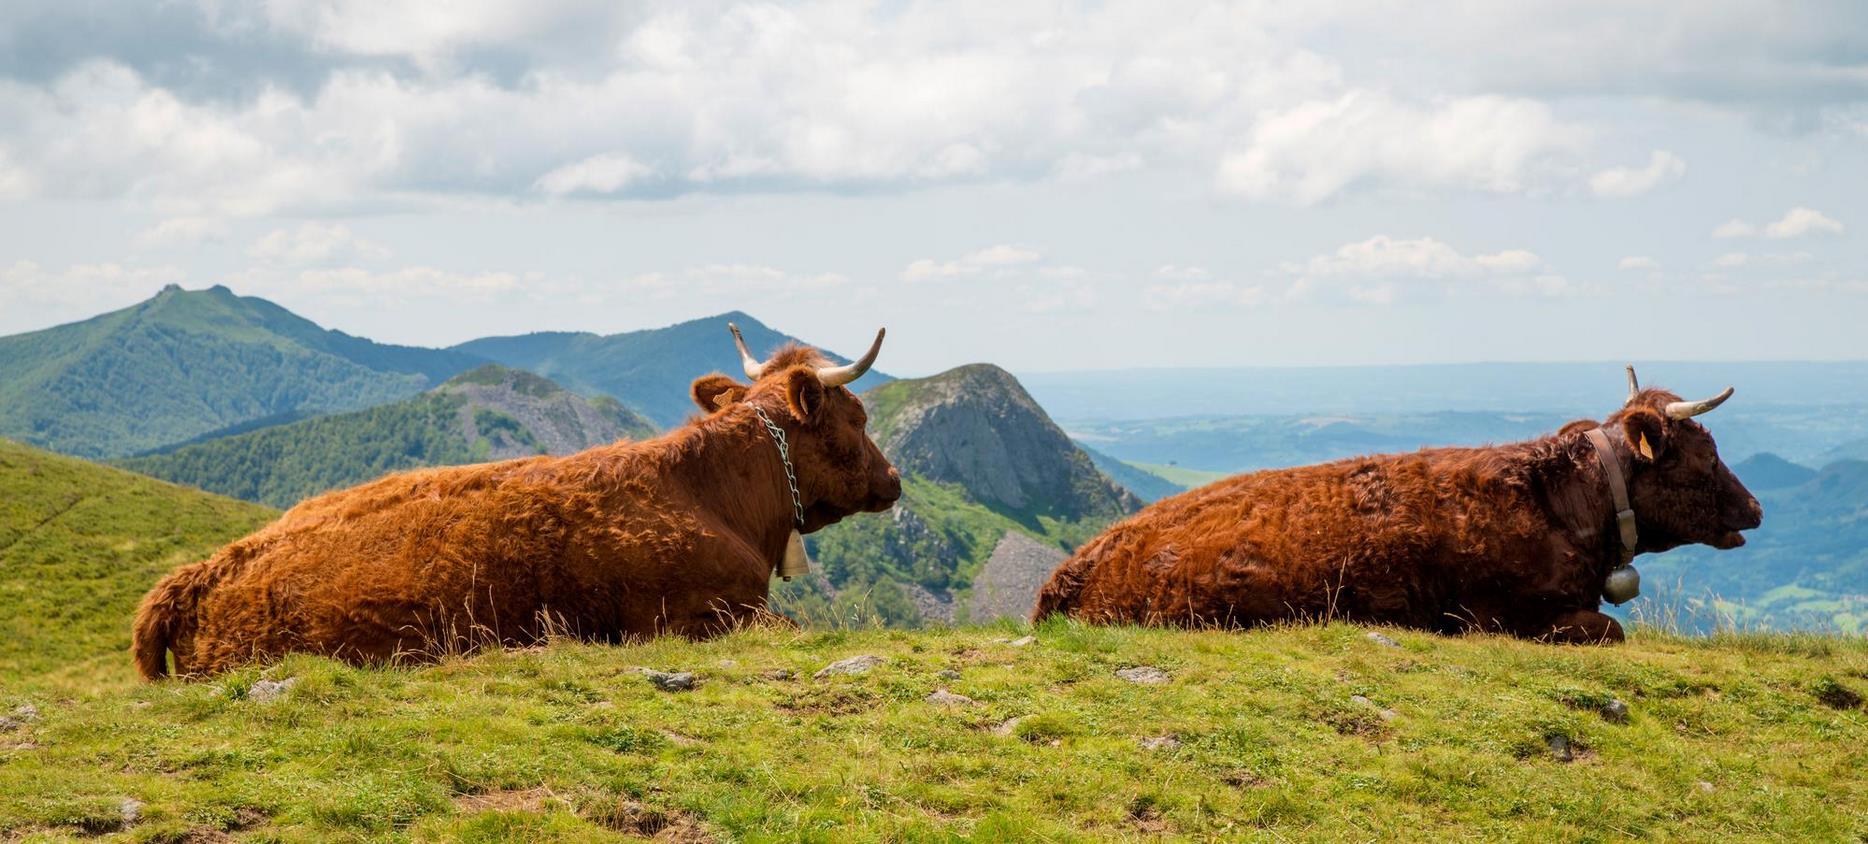 Cows in the summer pasture in the Natural Park of the Volcanoes of Auvergne